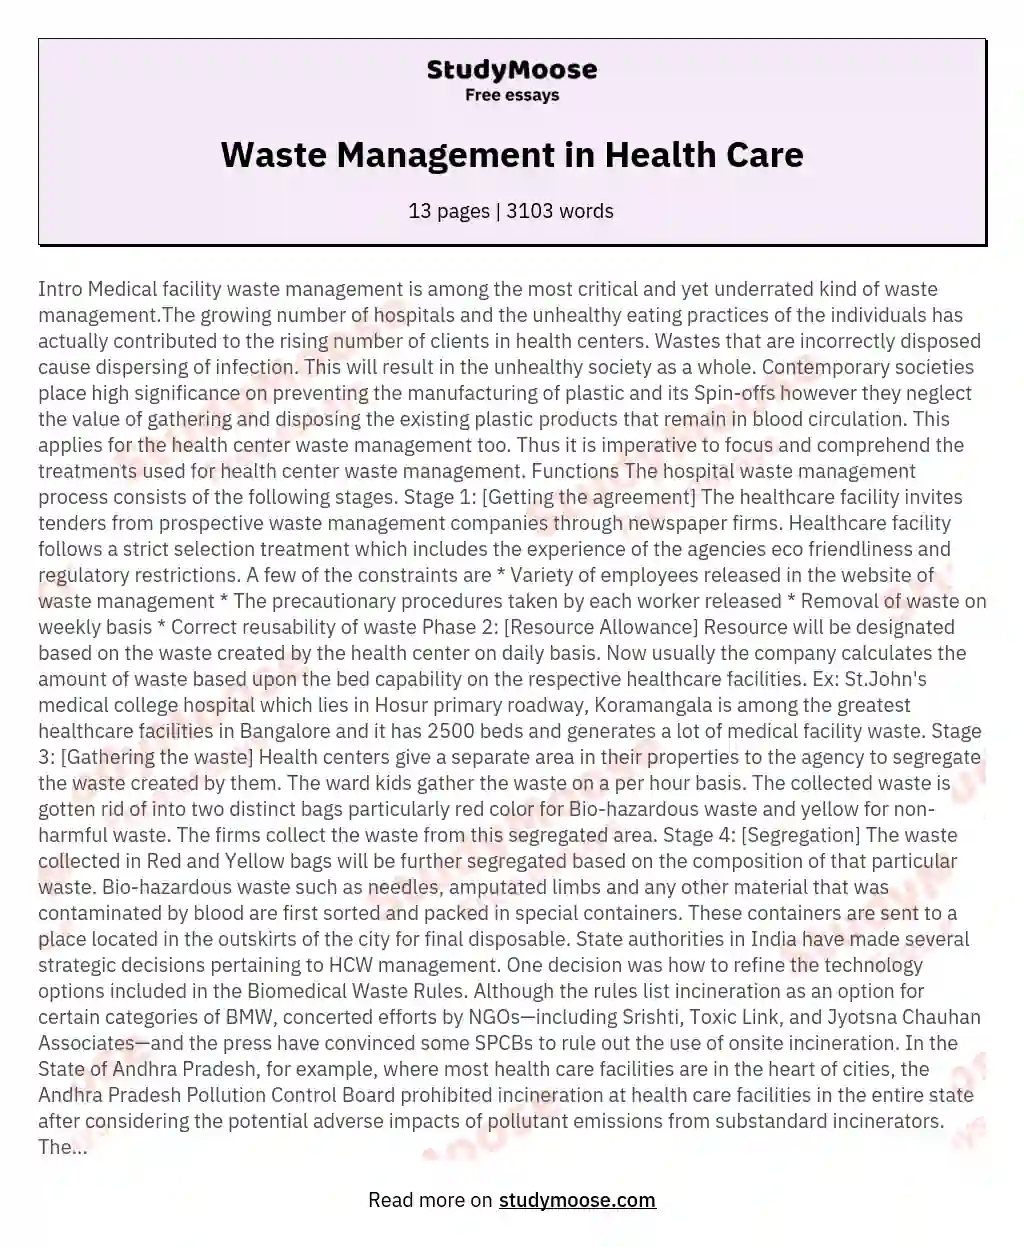 Waste Management in Health Care essay